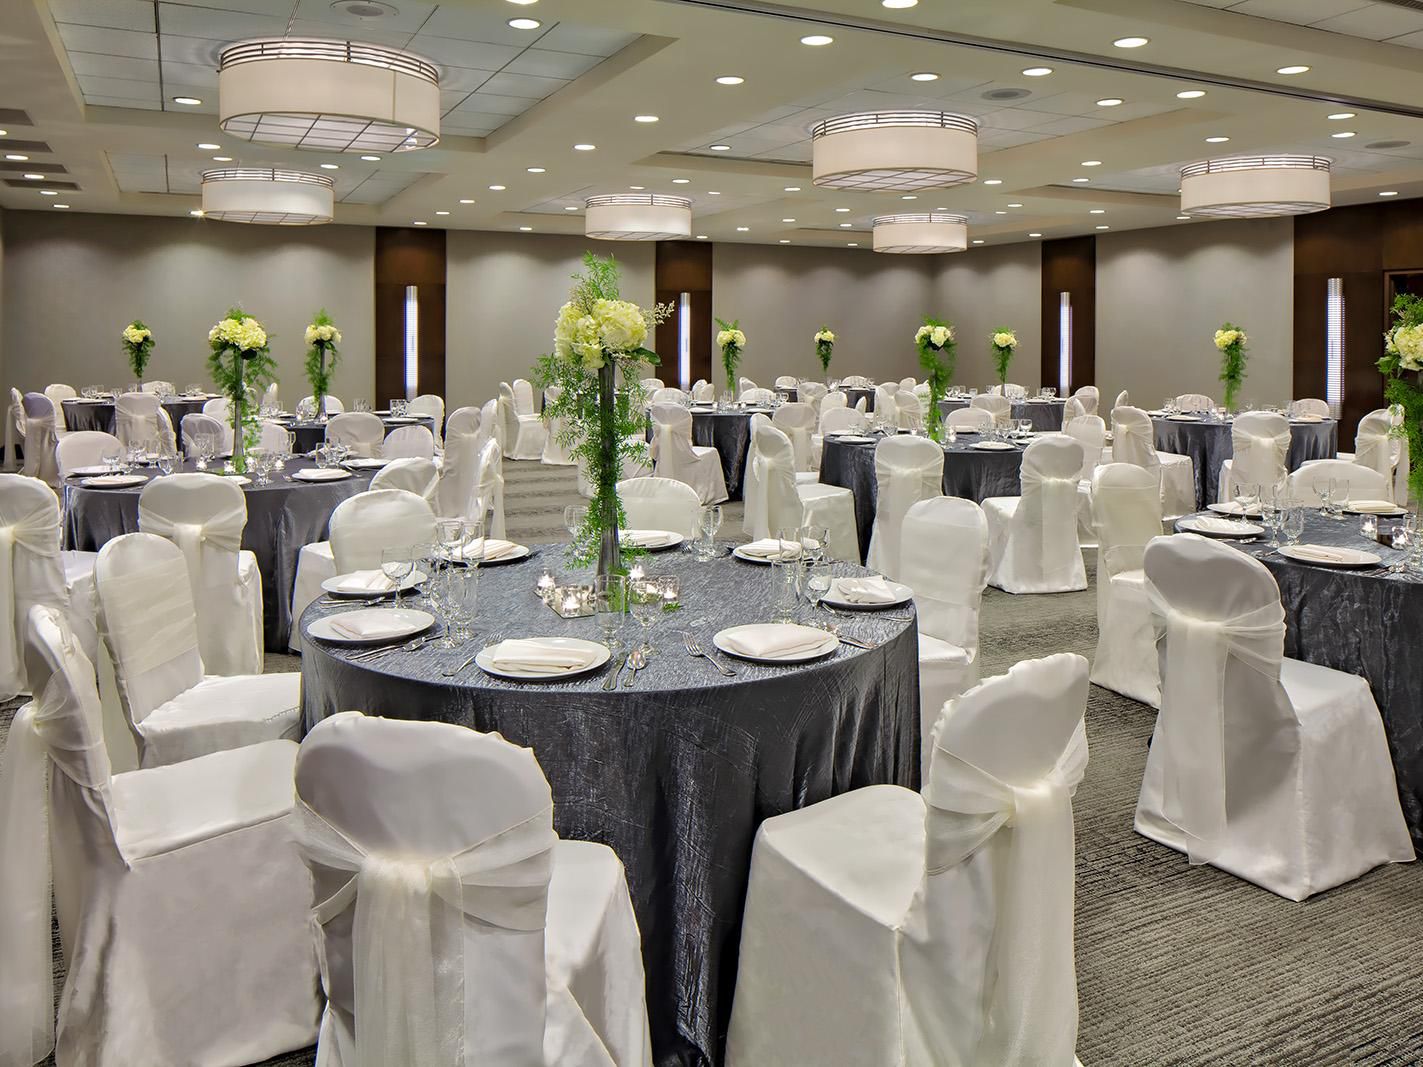 Our hotel makes for an ideal wedding venue in Chicago. See your wedding dreams come true in our grand ballroom. Our team will be happy to help you plan a memorable wedding that you and your guests are sure to treasure for years to come. Request a room block so all your guests can stay in our spacious rooms or even have a post-wedding brunch.